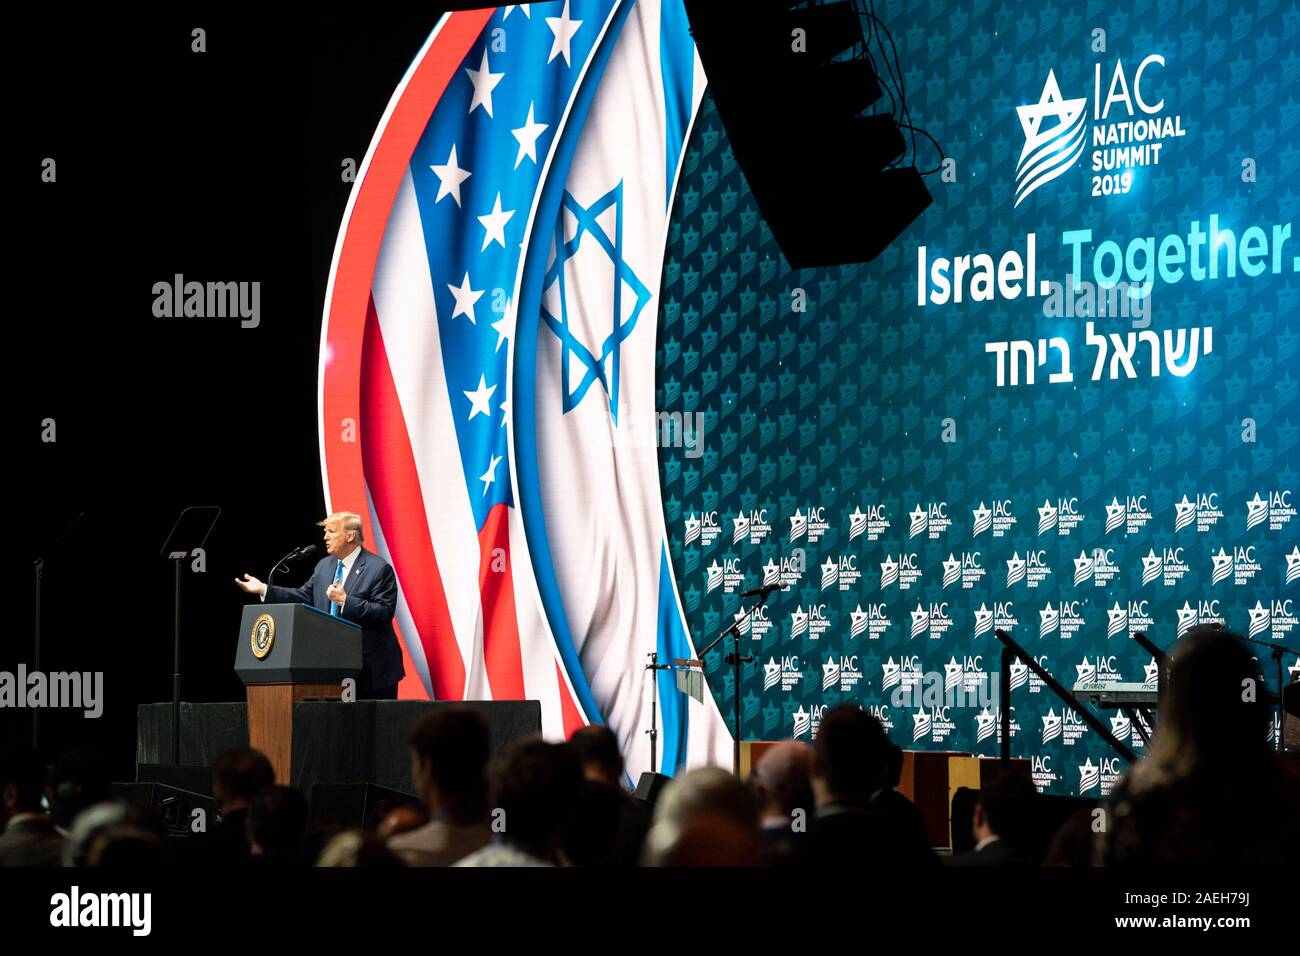 U.S President Donald Trump addresses the Israeli American Council National Summit at the Diplomat Beach Resort December 7, 2019 in Hollywood, Florida. Stock Photo